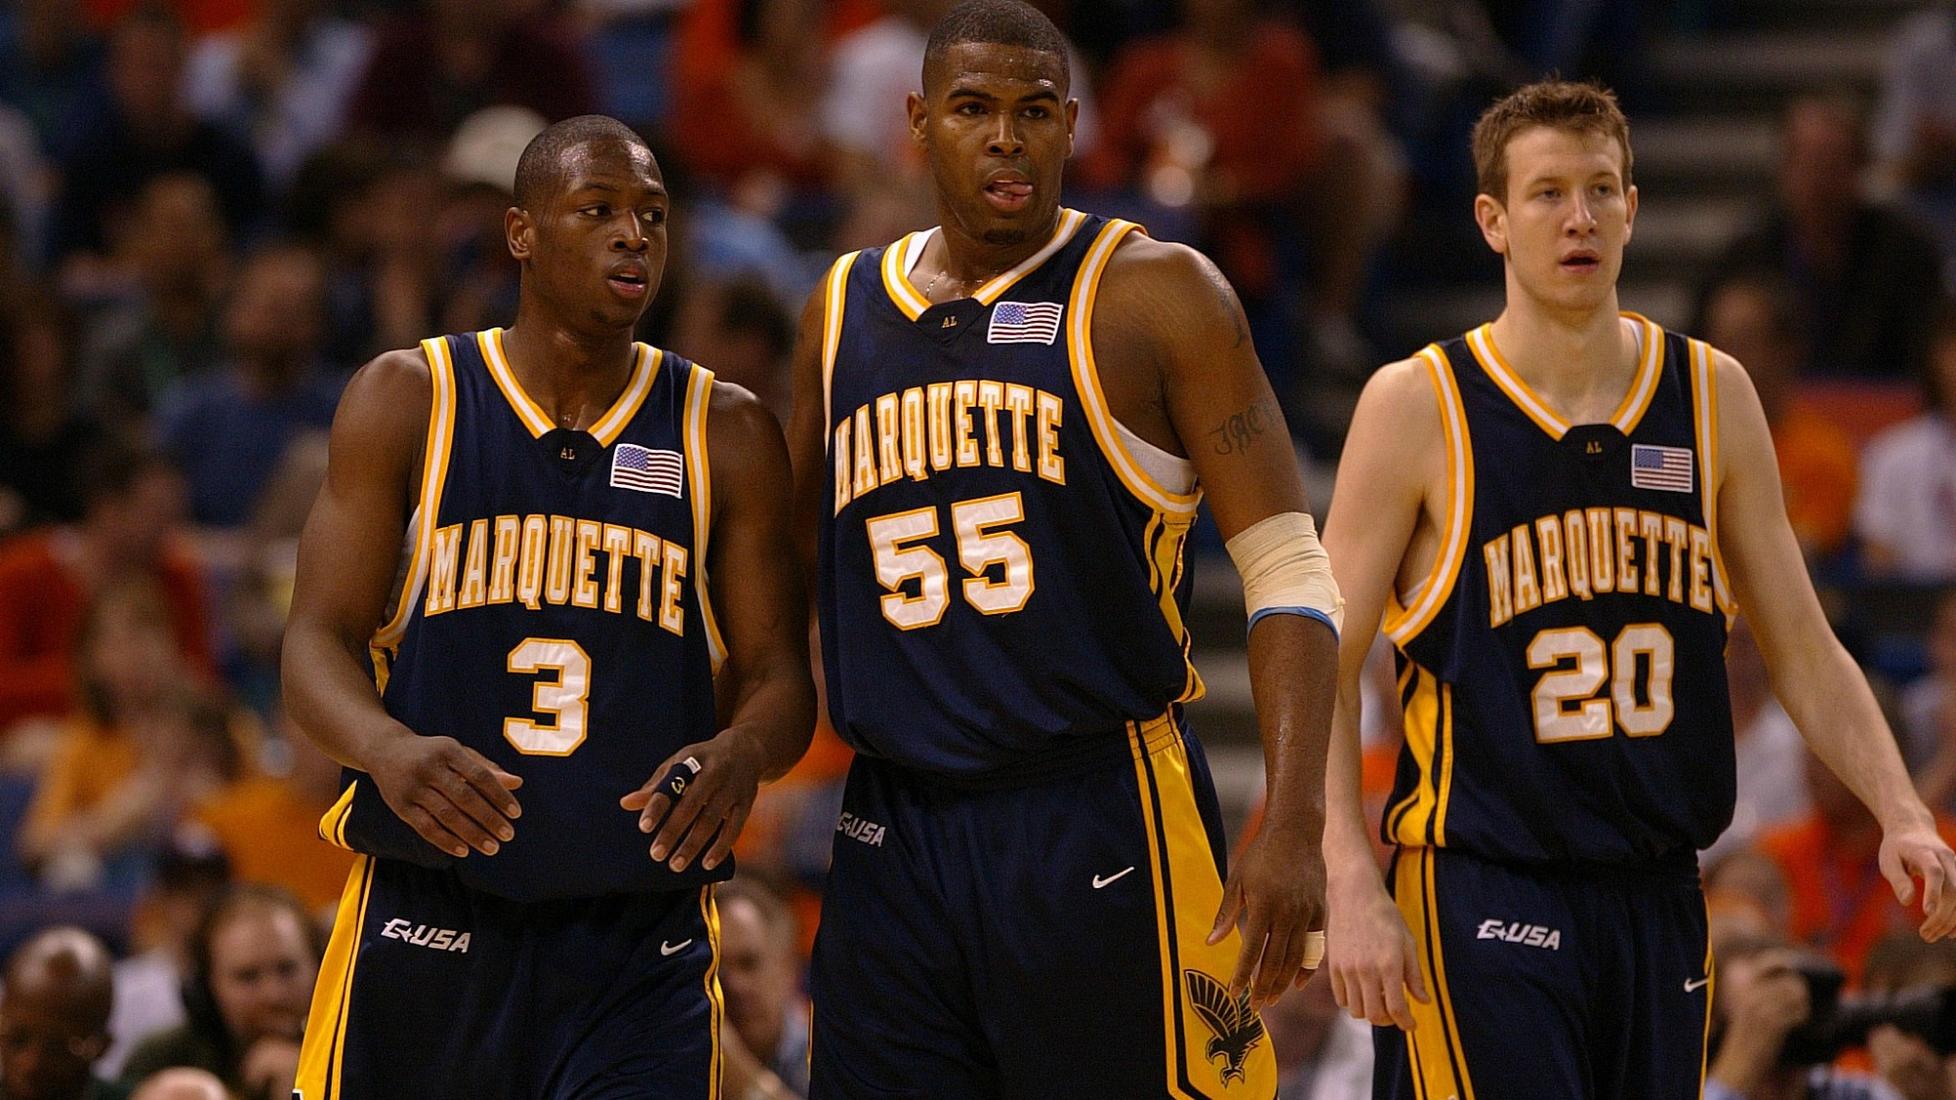 Dwyane Wade's memorable games at Marquette